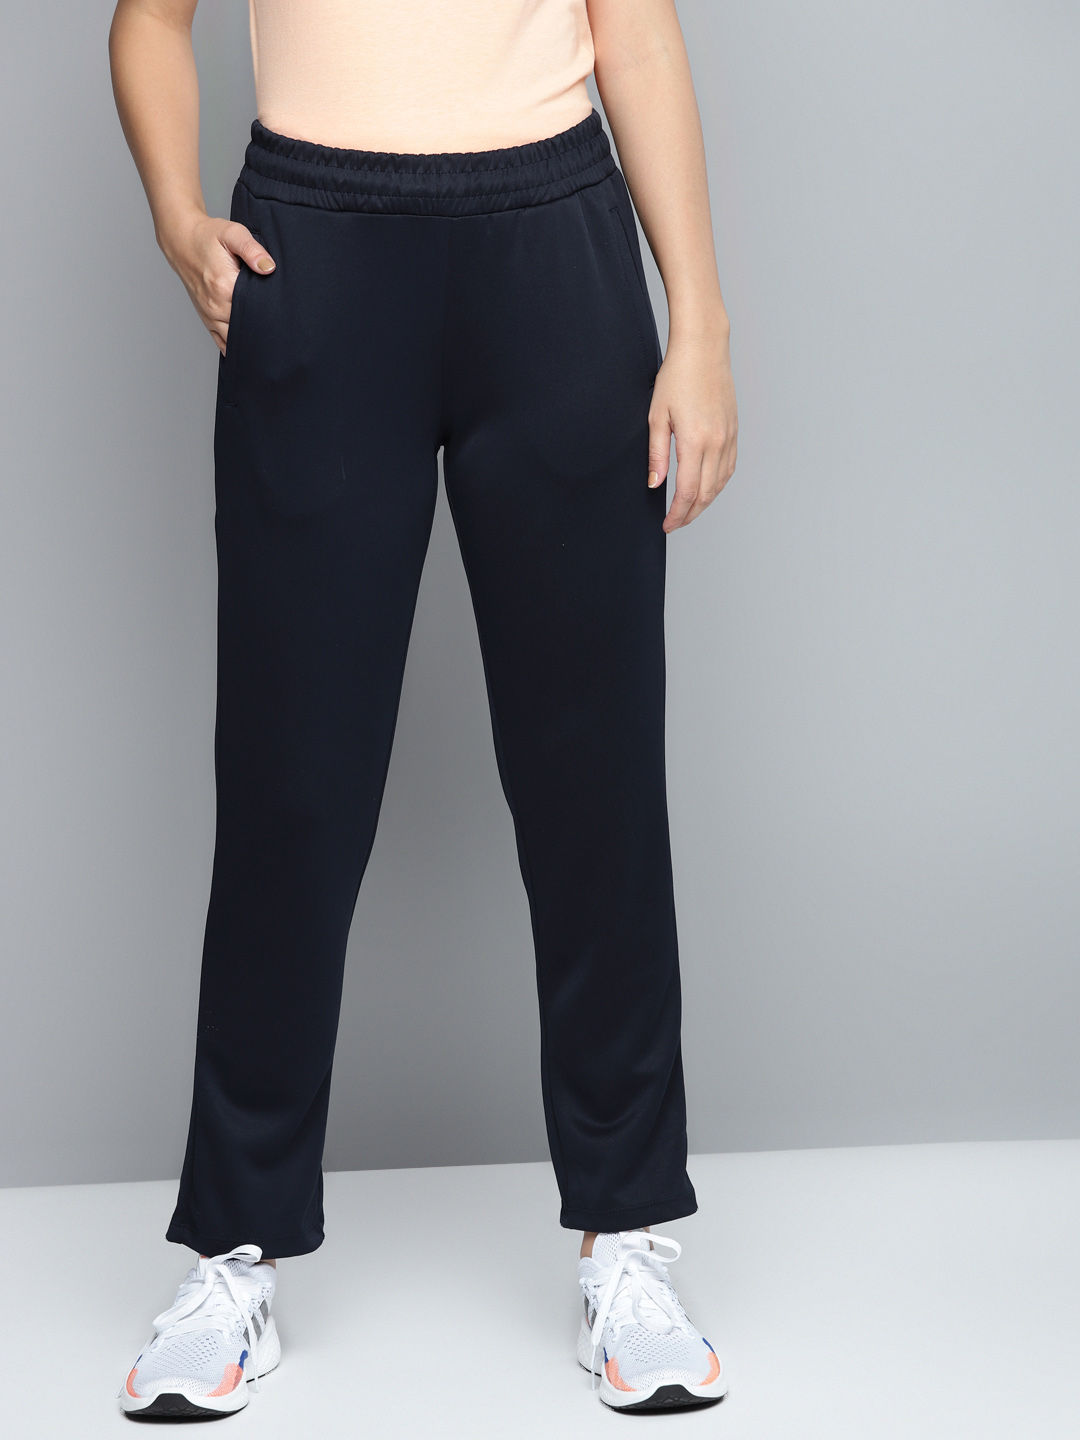 Buy Joggers For Women Online In India At Best Price Offers | Tata CLiQ